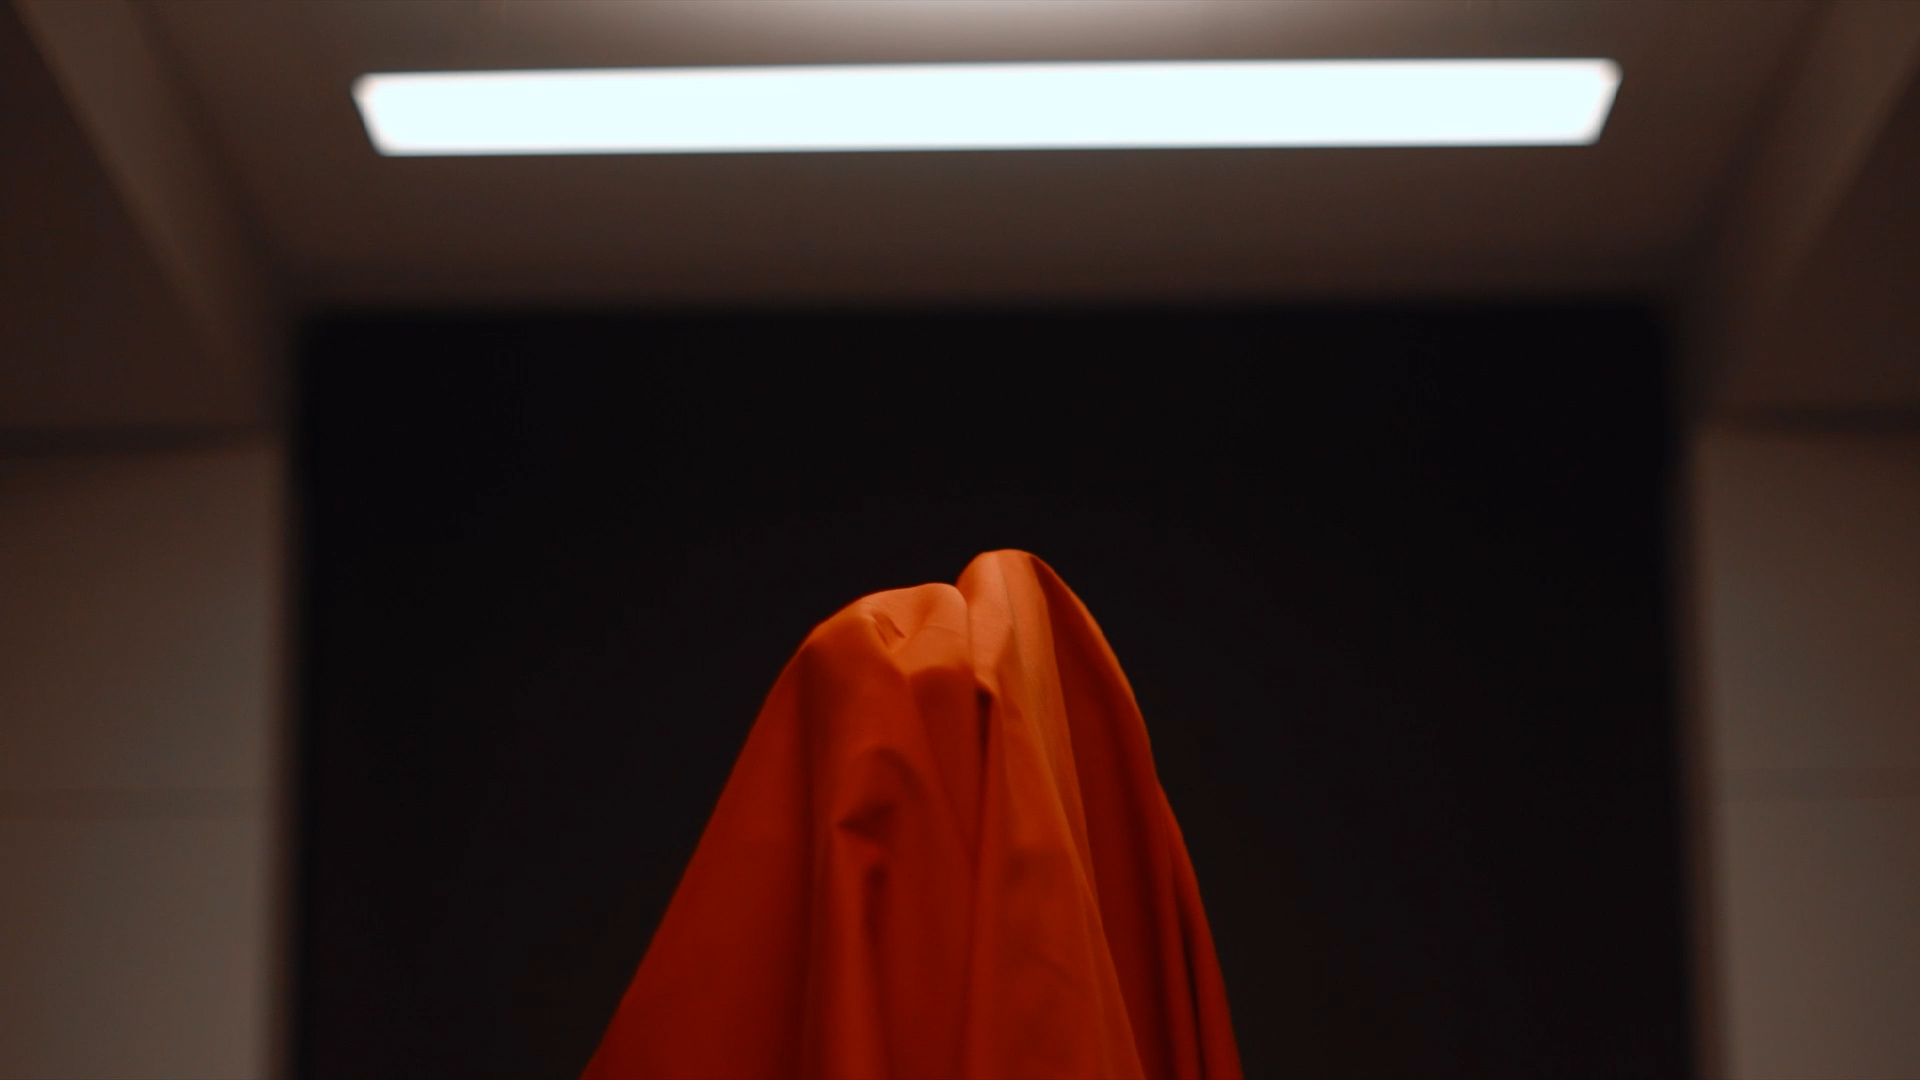 Still from the short film 'Aperture' showing a figure bathed in a red Cloth.